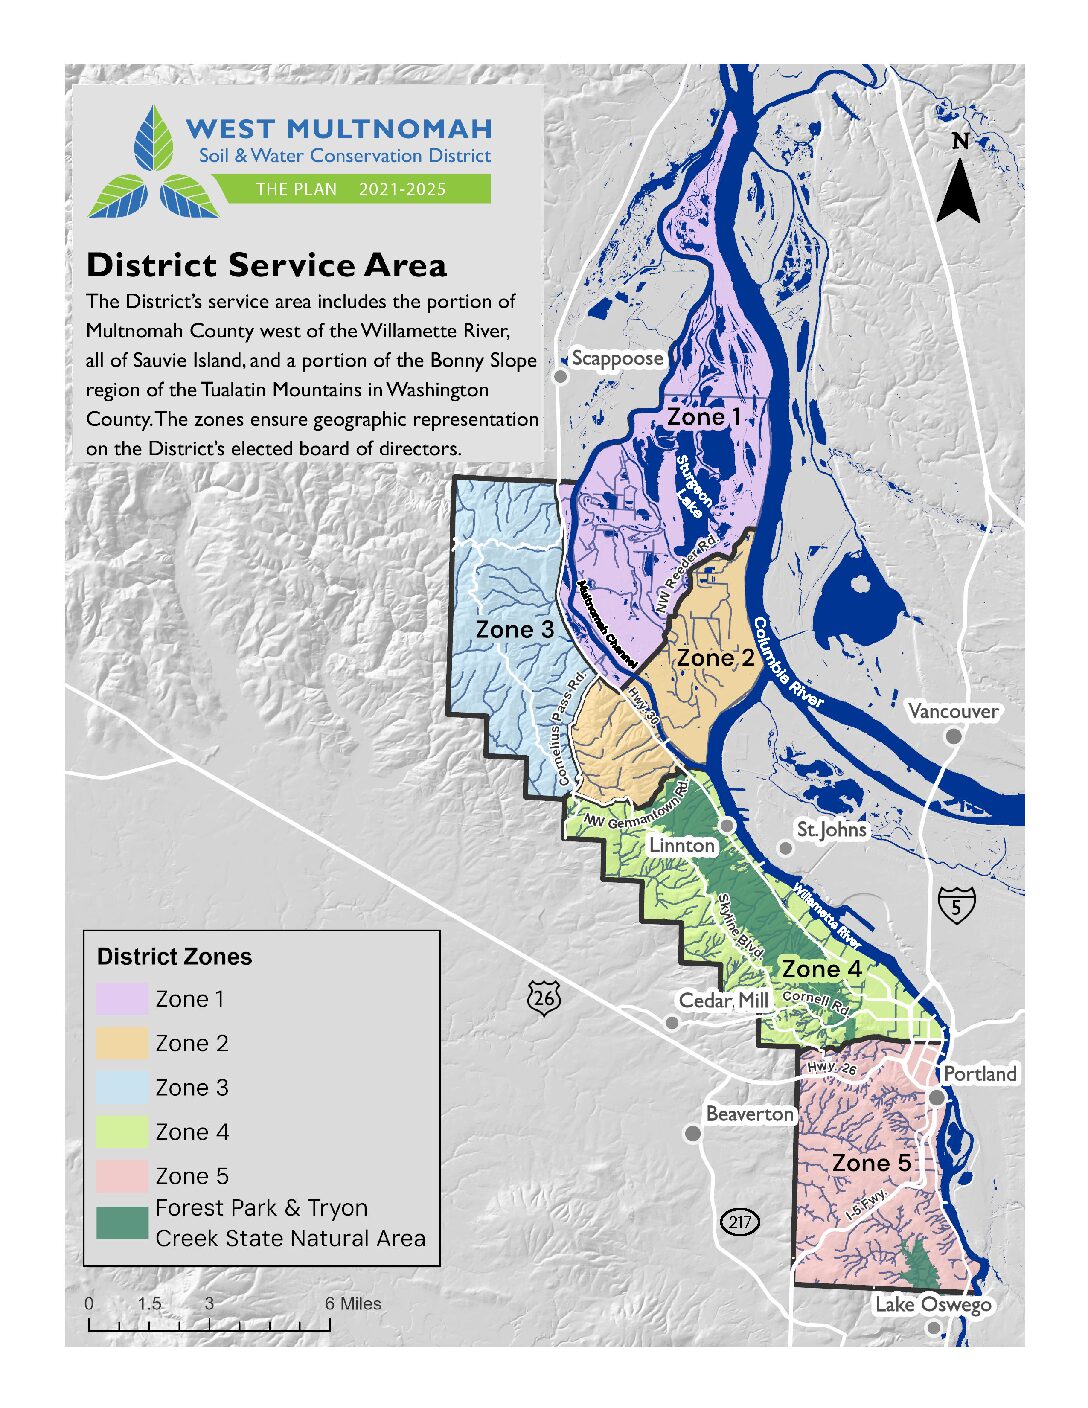 District Service area map with color coding of West Multnomah's 5 zones.